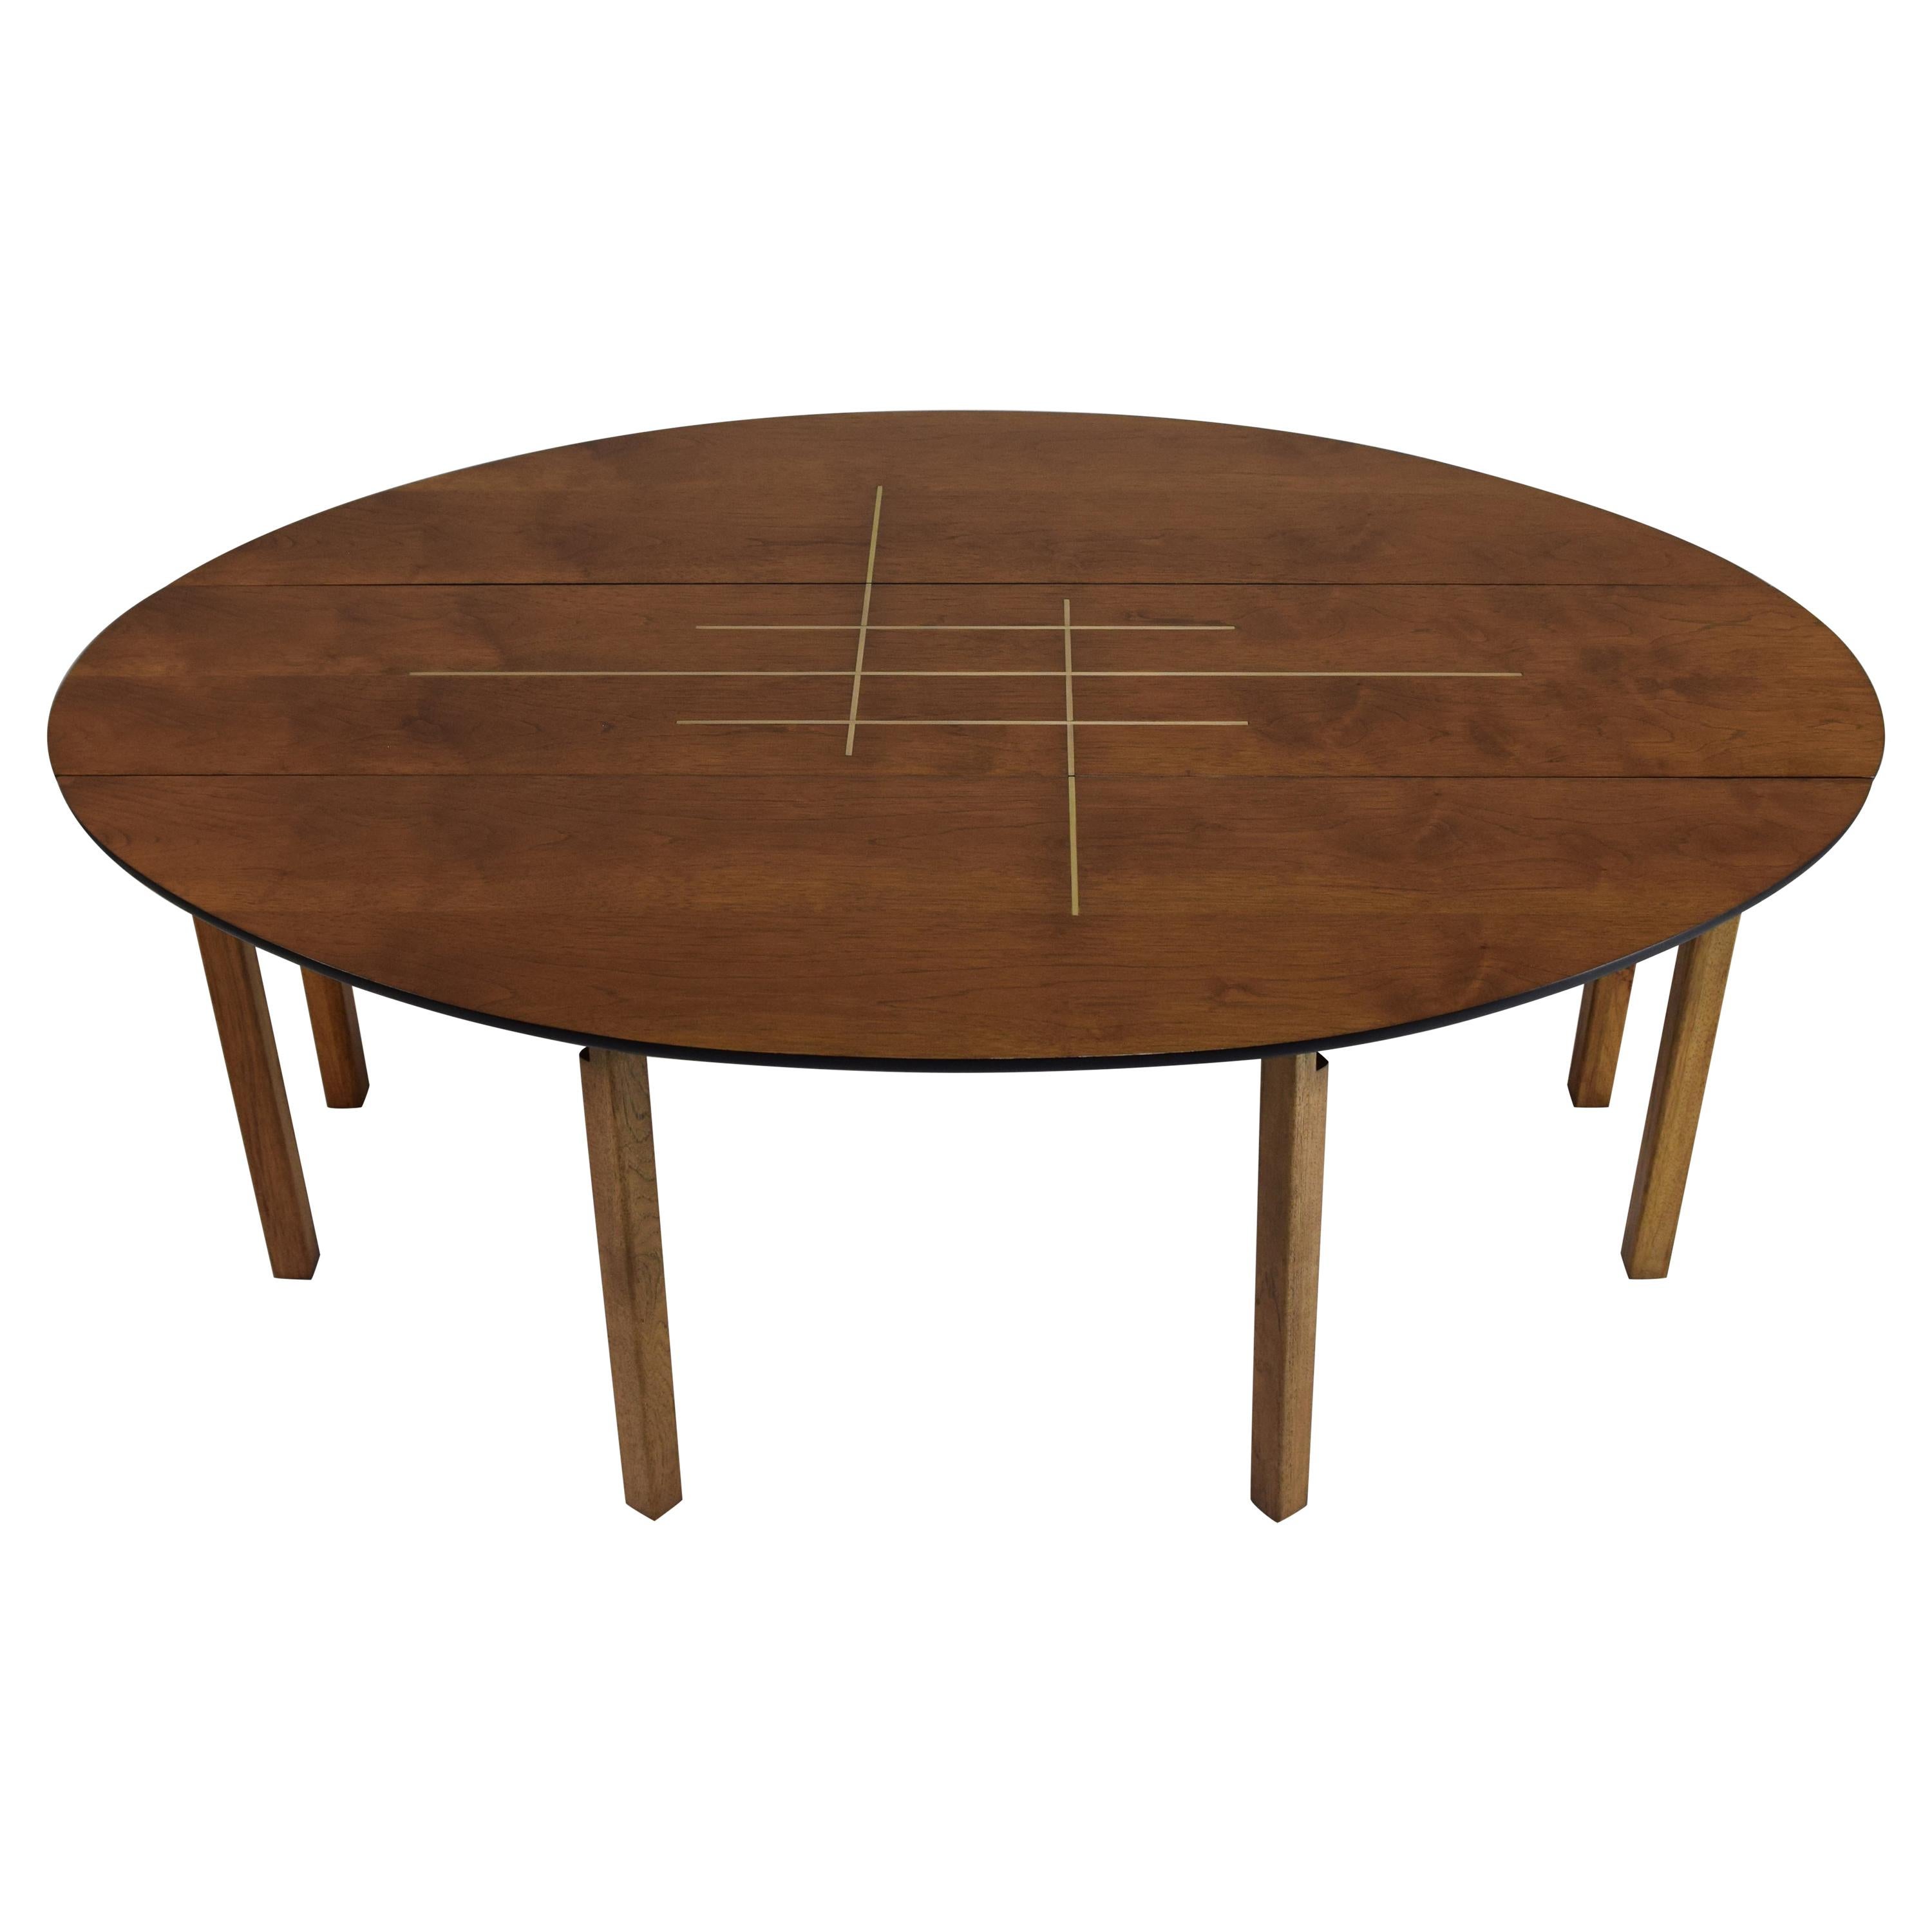 Unique Oval Drop Leaf Dining Table